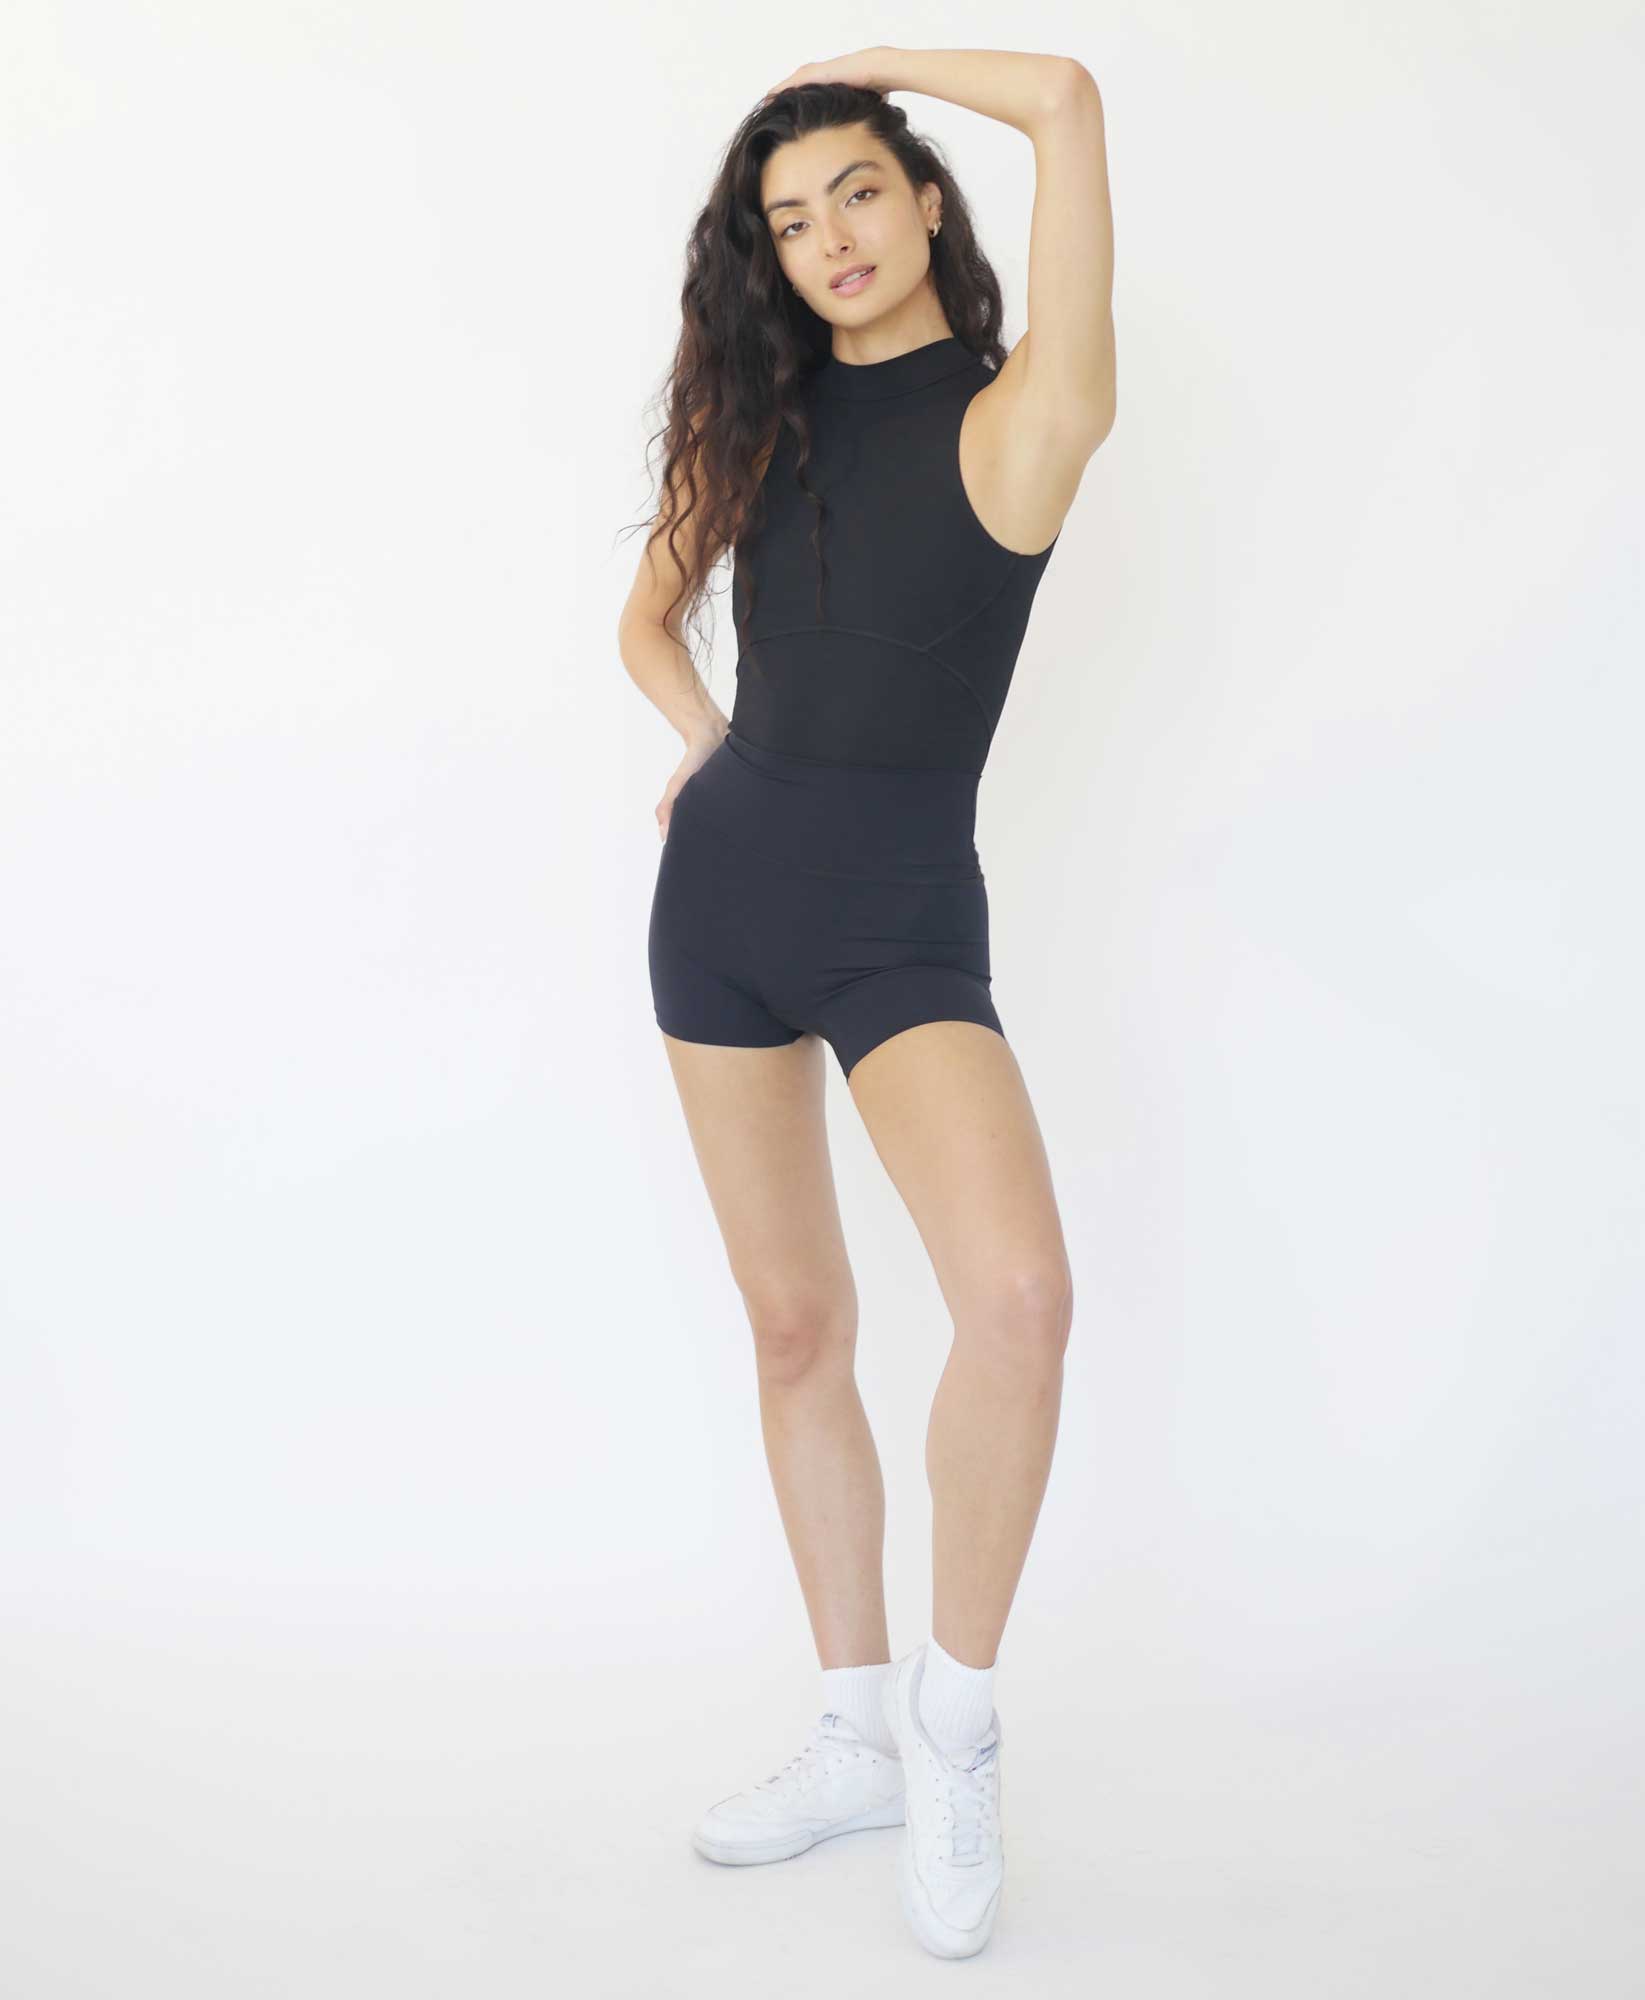 Wear One's At Aerobic Rib Bodysuit in Jet Black on Model with Arm Up Full Front View